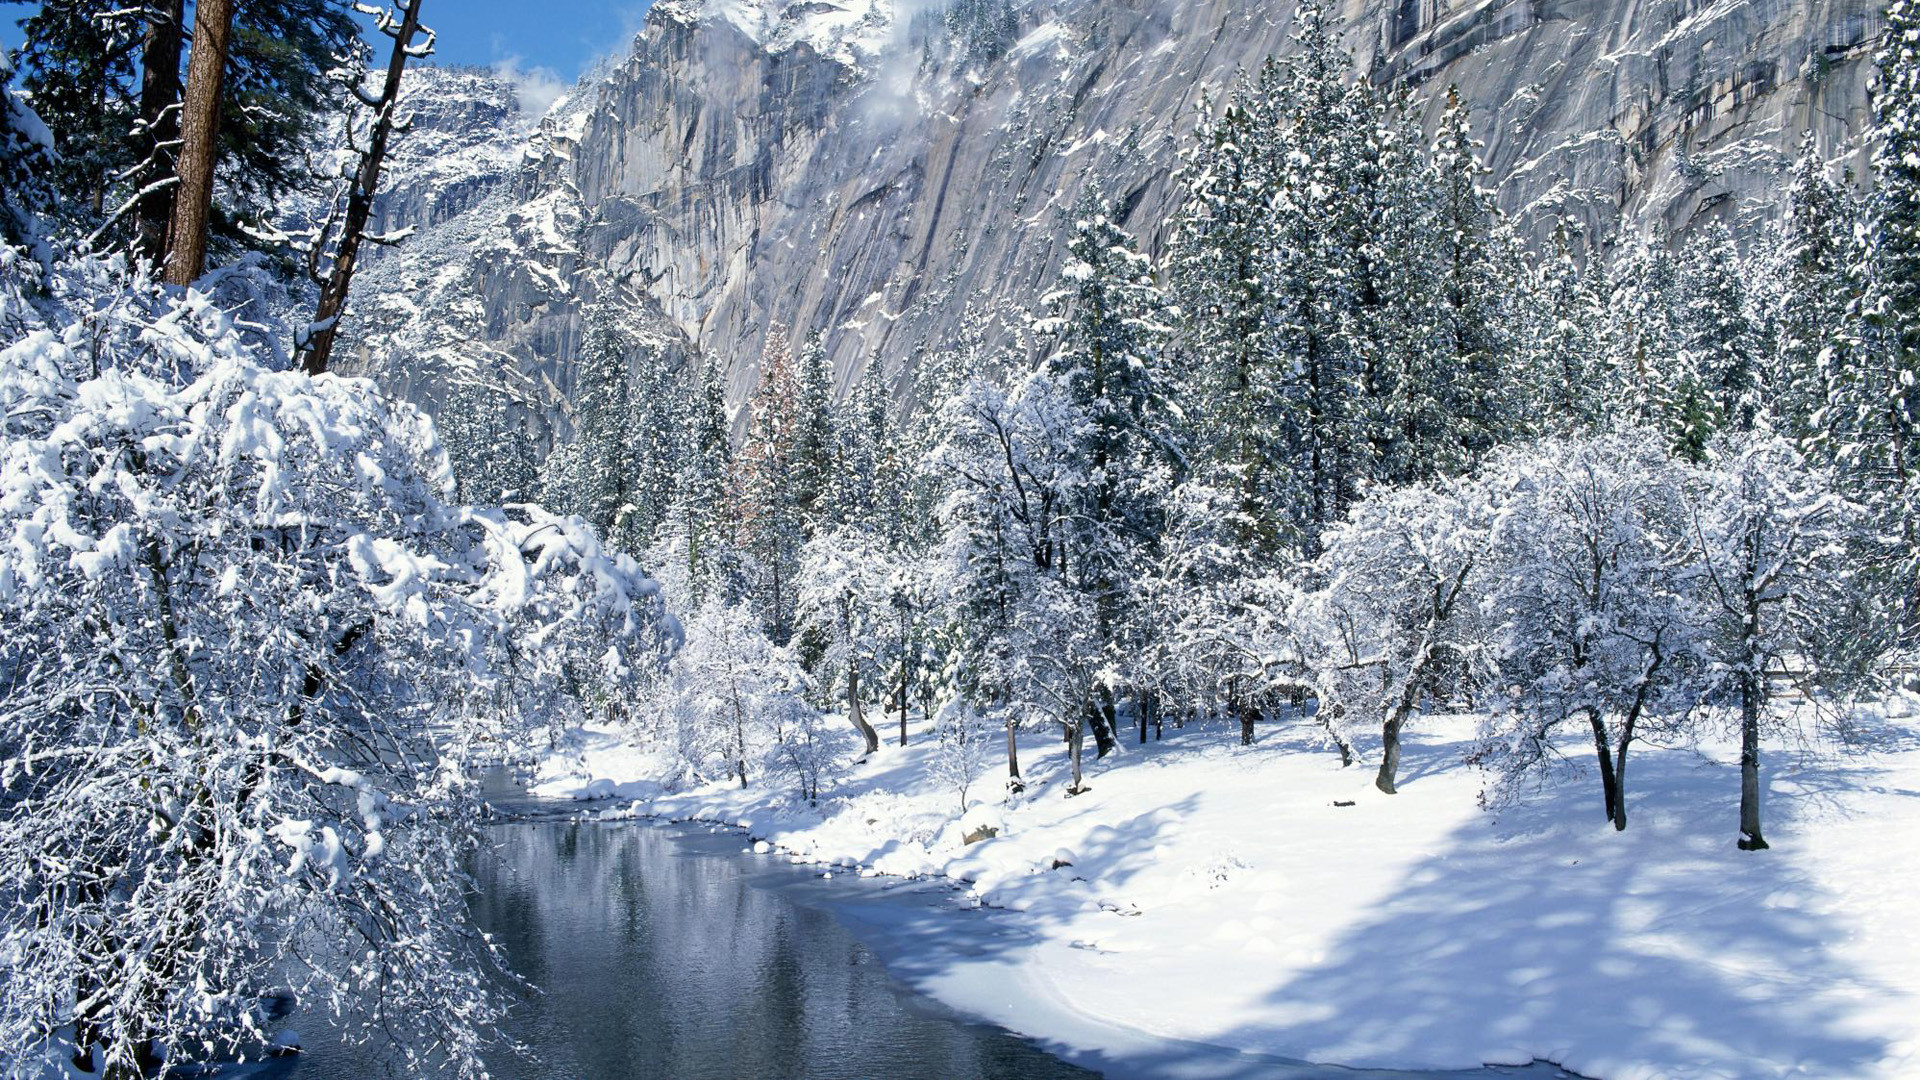 1920x1080 bing winter images | Resize & Crop it in available screen resolutions